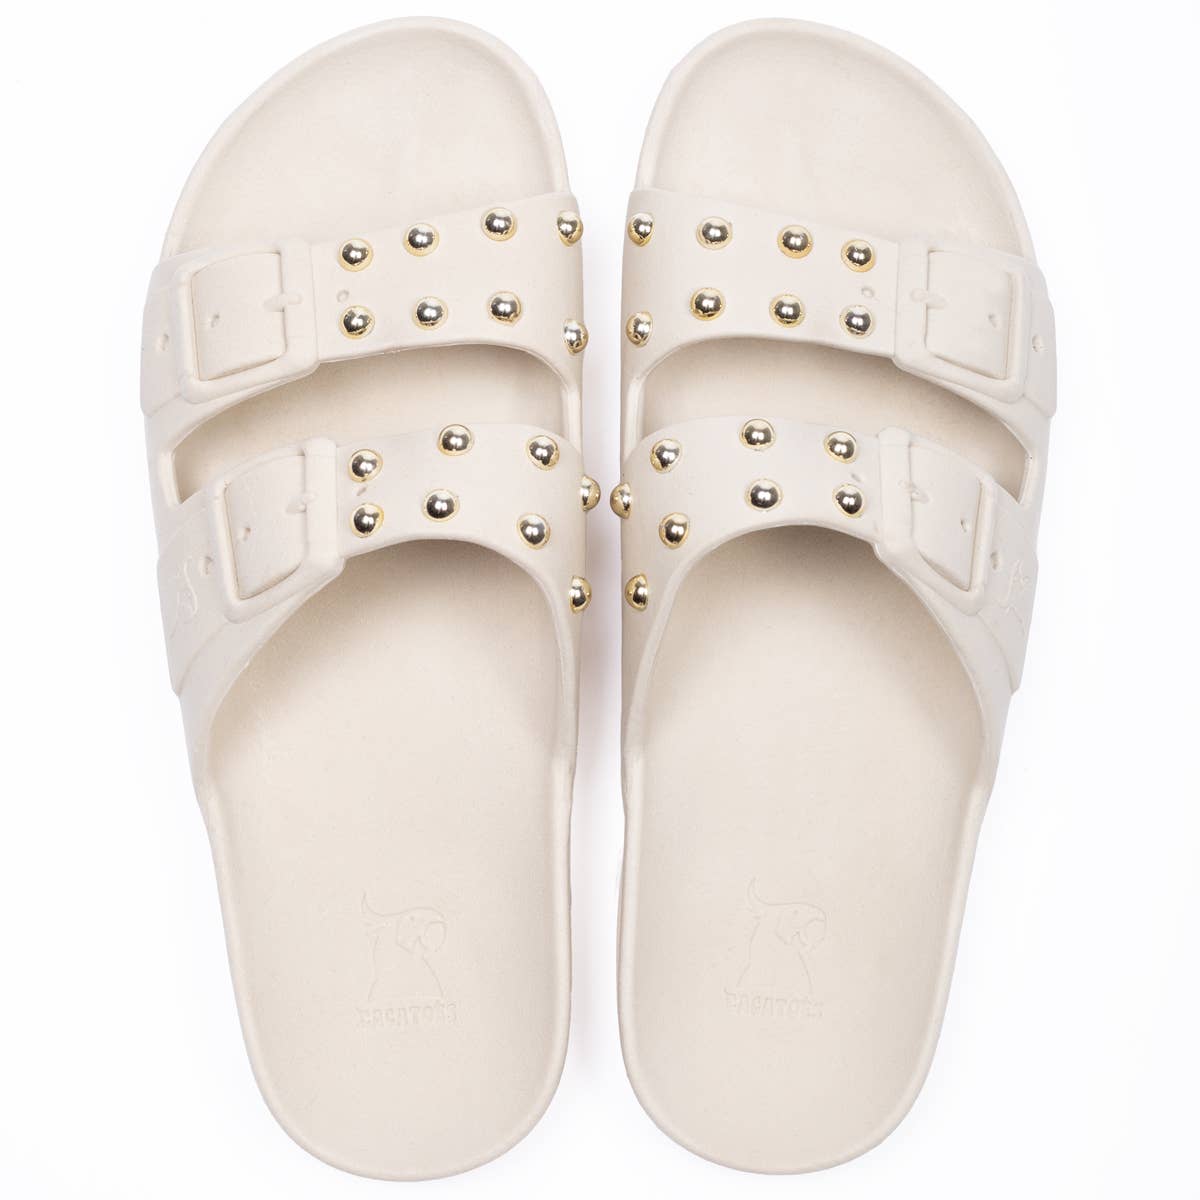 Cacatoès Florianopolis Domed Studs White Sandals